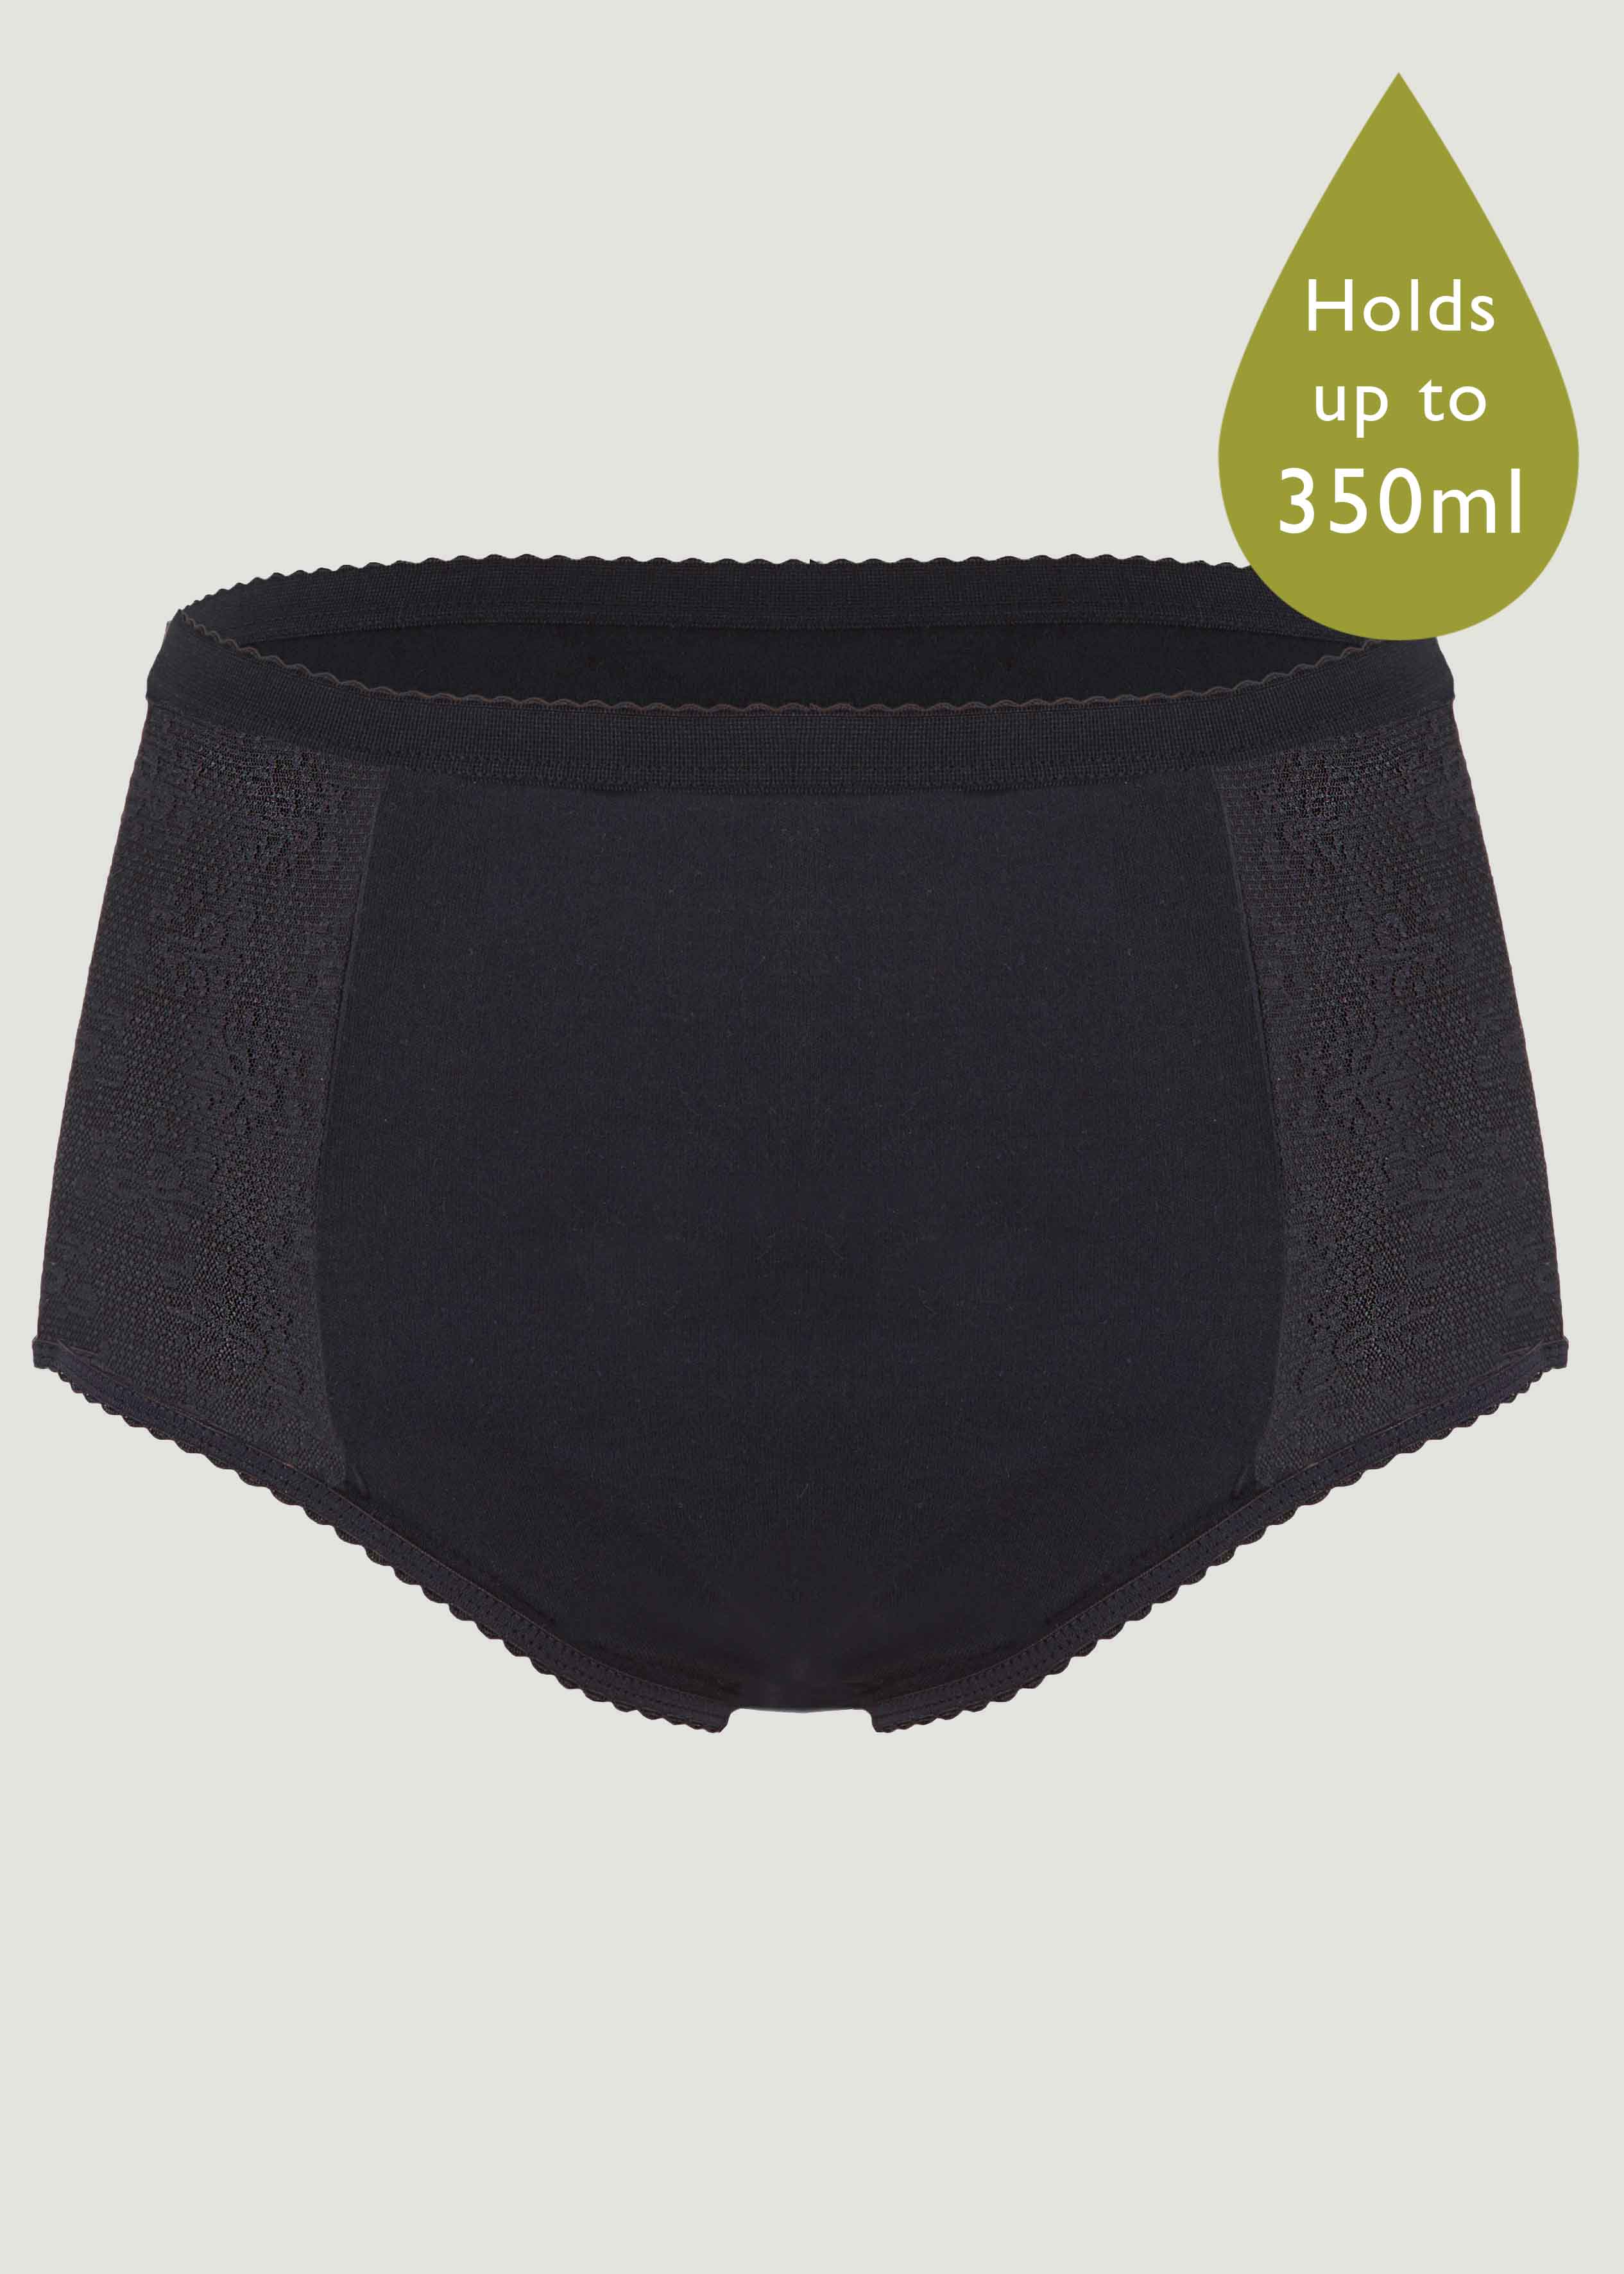 Absorbent Full Brief Knickers, Black